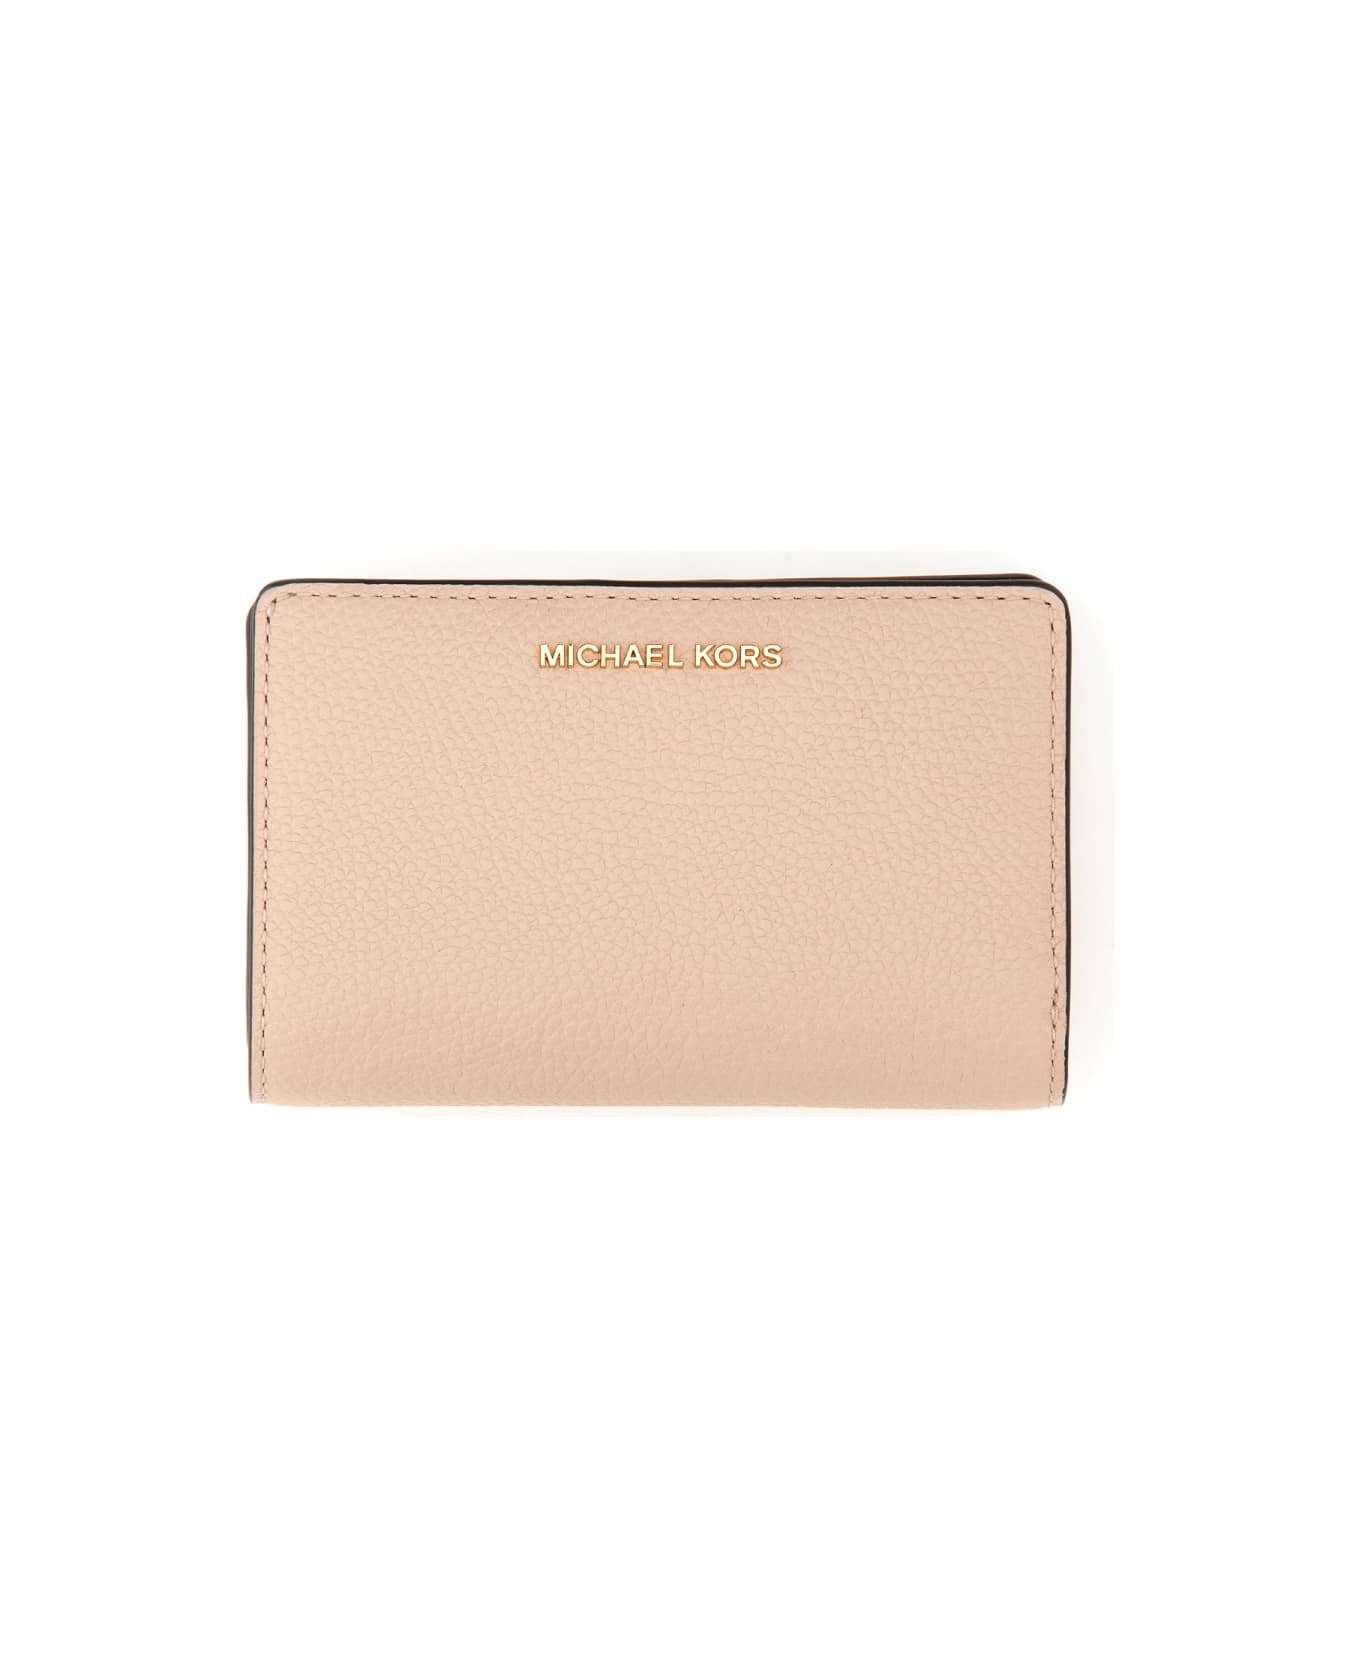 Michael Kors Wallet With Logo - PINK